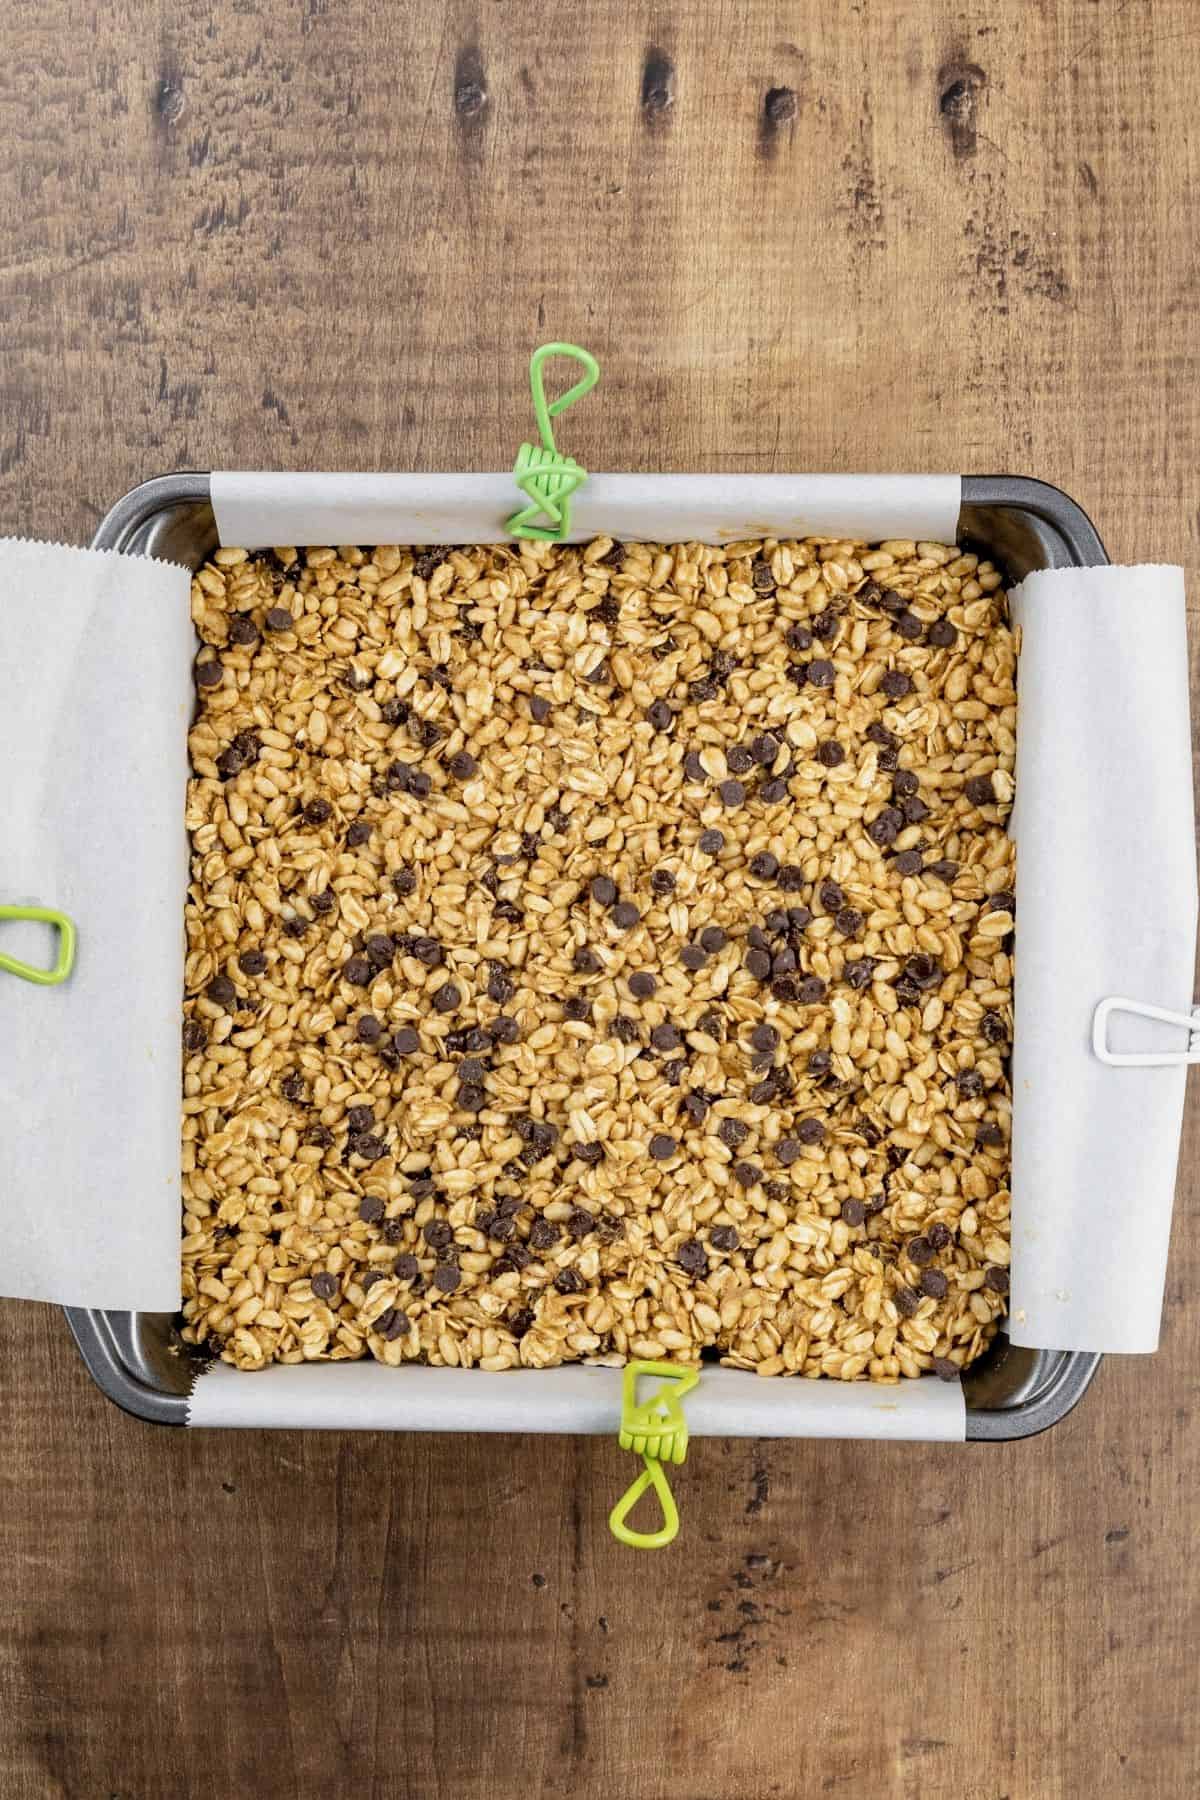 A metal 8x8 pan is lined with parchment paper and filled with the granola bar mixture that has been pressed into place. It rests on a wood table.